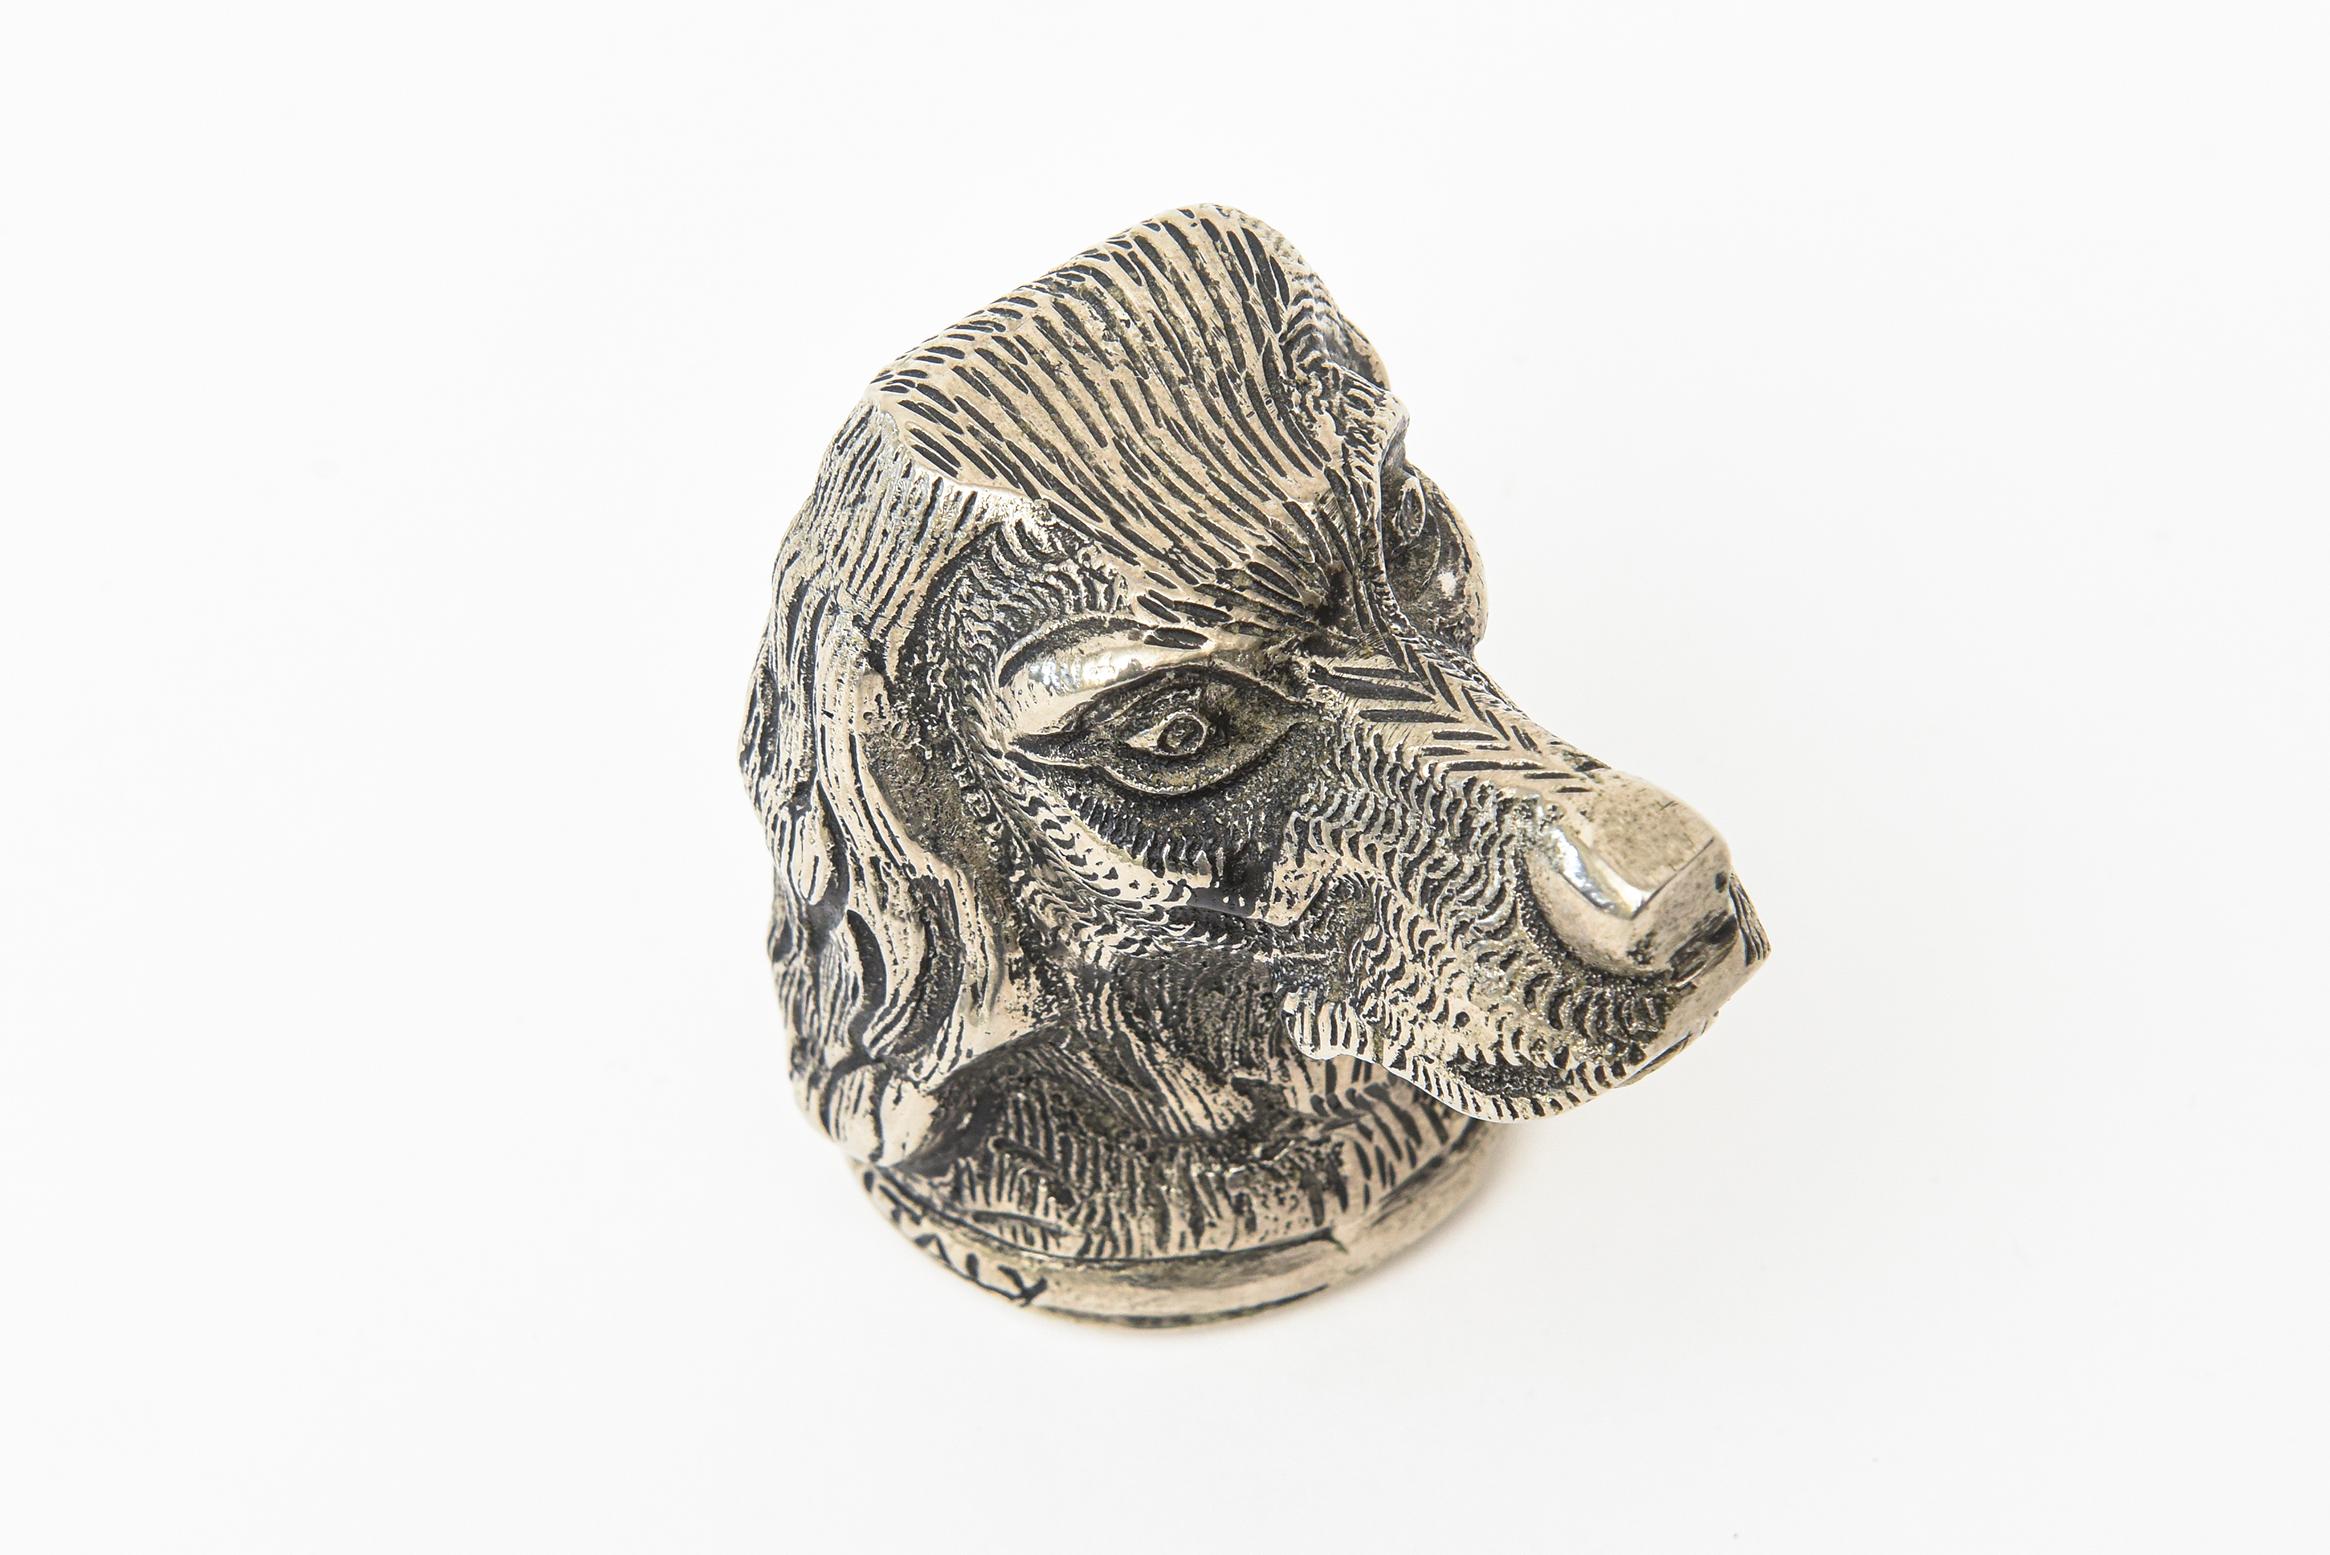 Late 20th Century Gucci Signed Silver-Plate Dog Head Bottle Opener Vintage Italian Barware